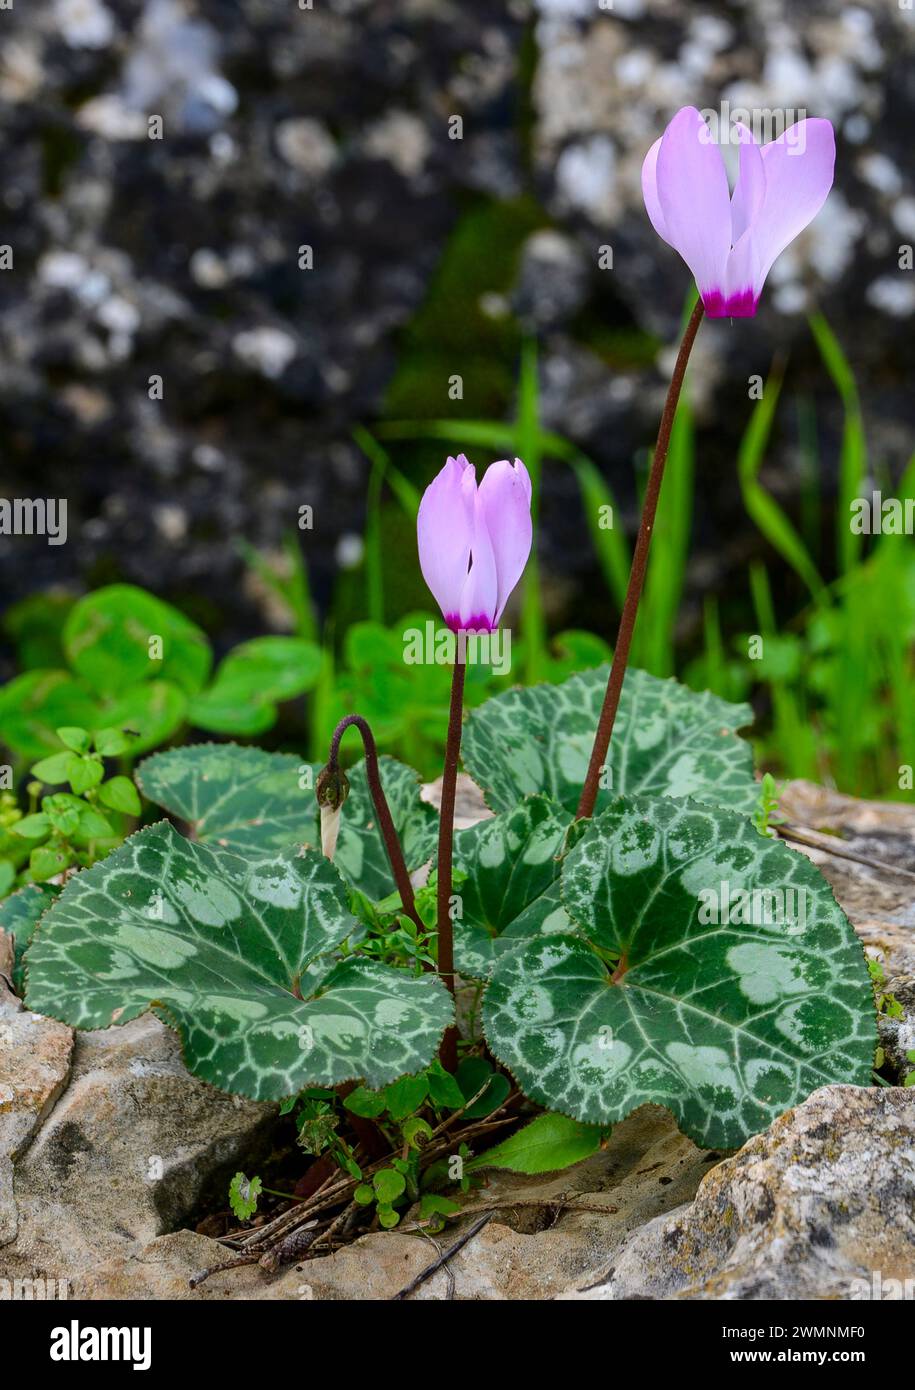 Flowering Persian Violets (Cyclamen persicum). الراعي, Photographed in the pine tree forest in Israel Stock Photo